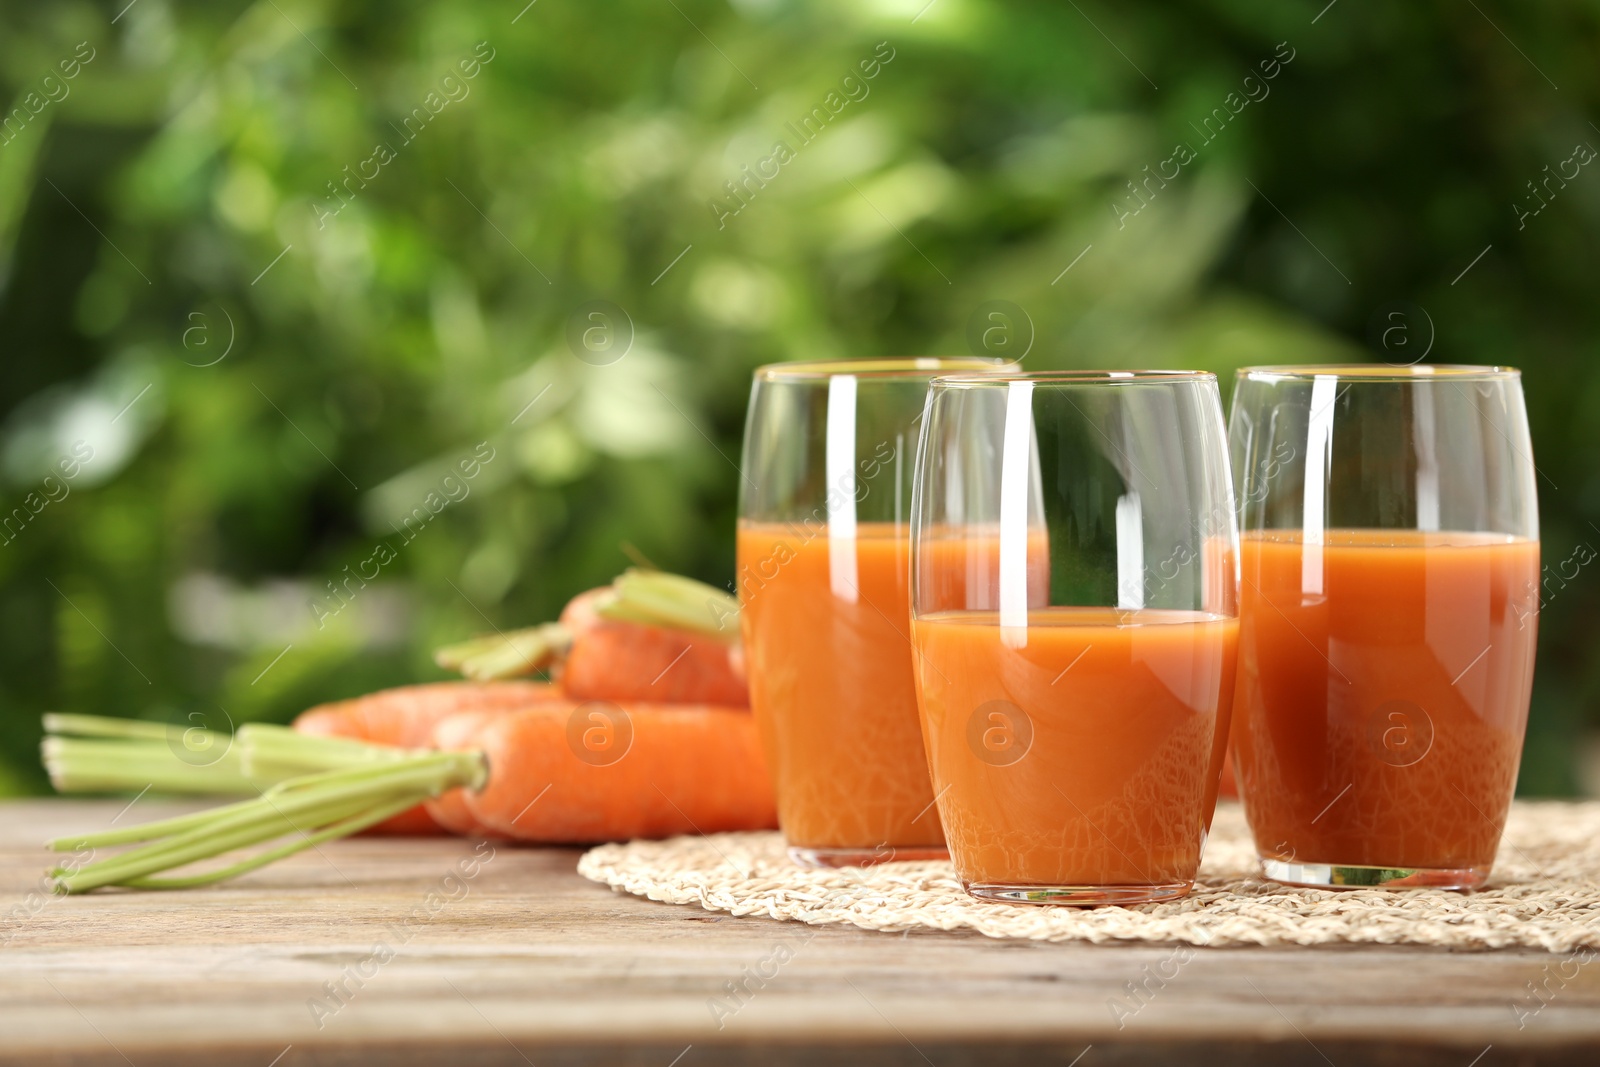 Photo of Glasses of juice and carrots on wooden table against blurred background, space for text